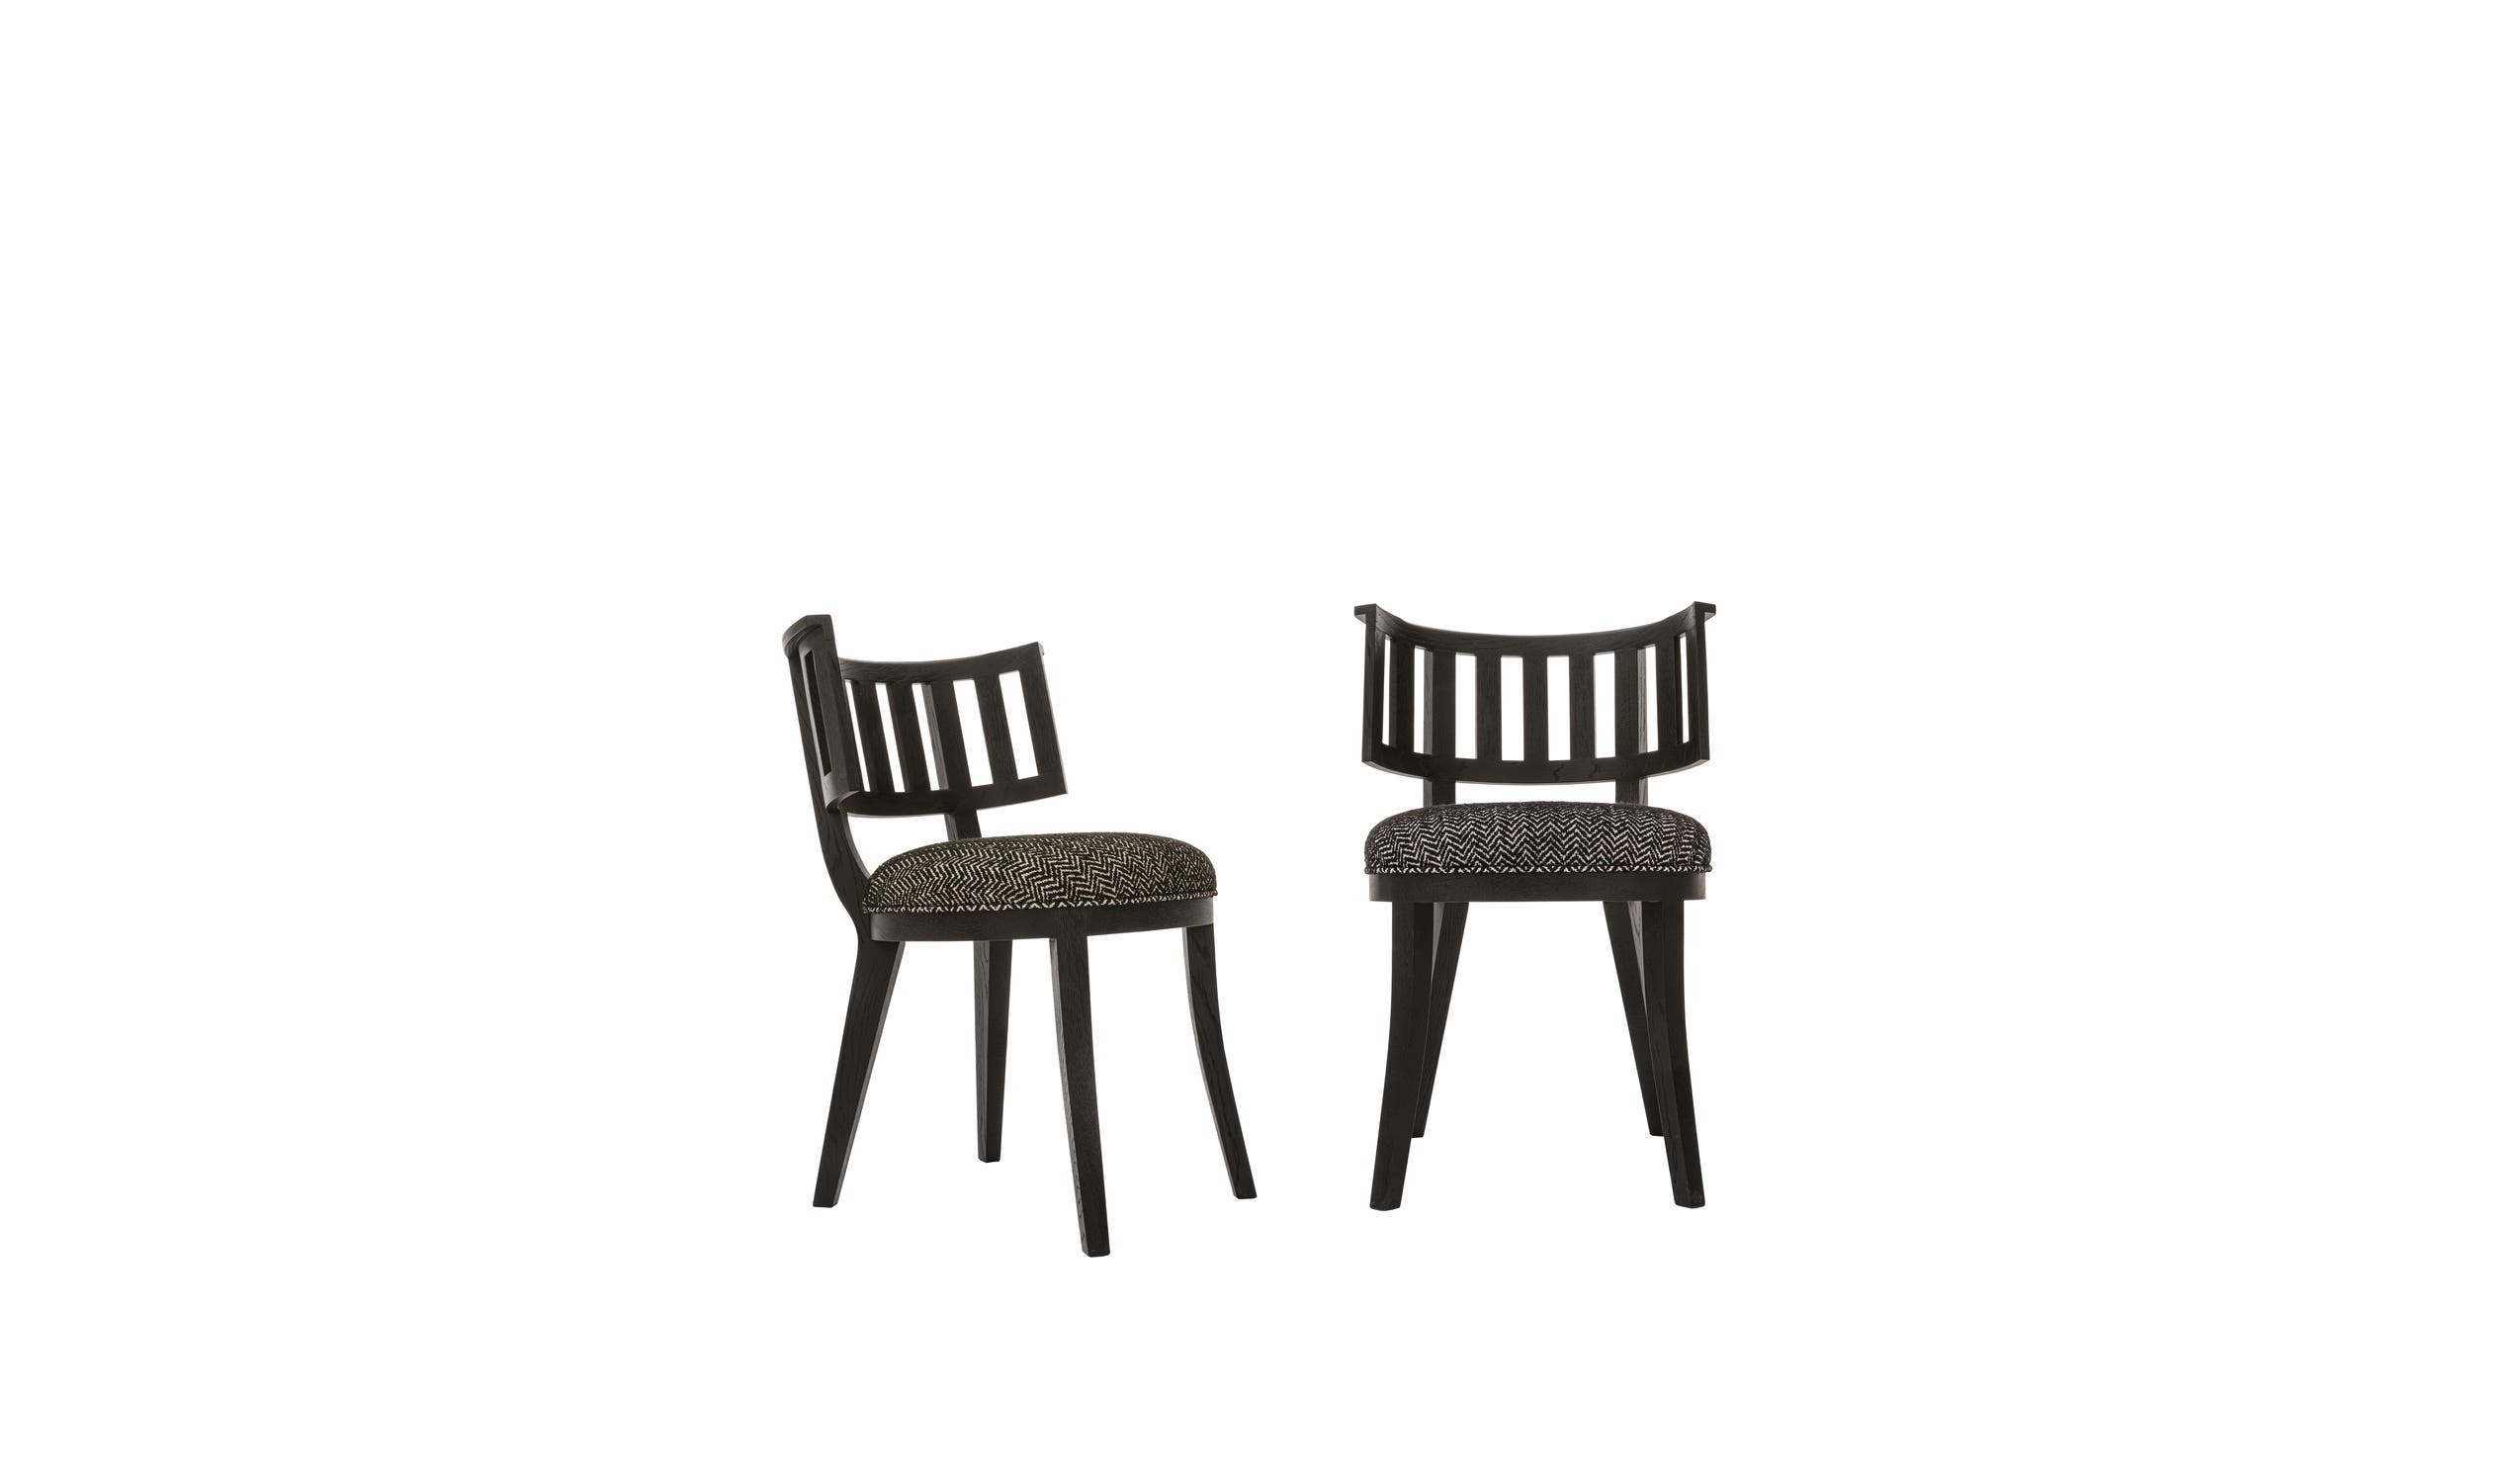 Cleide Chairs